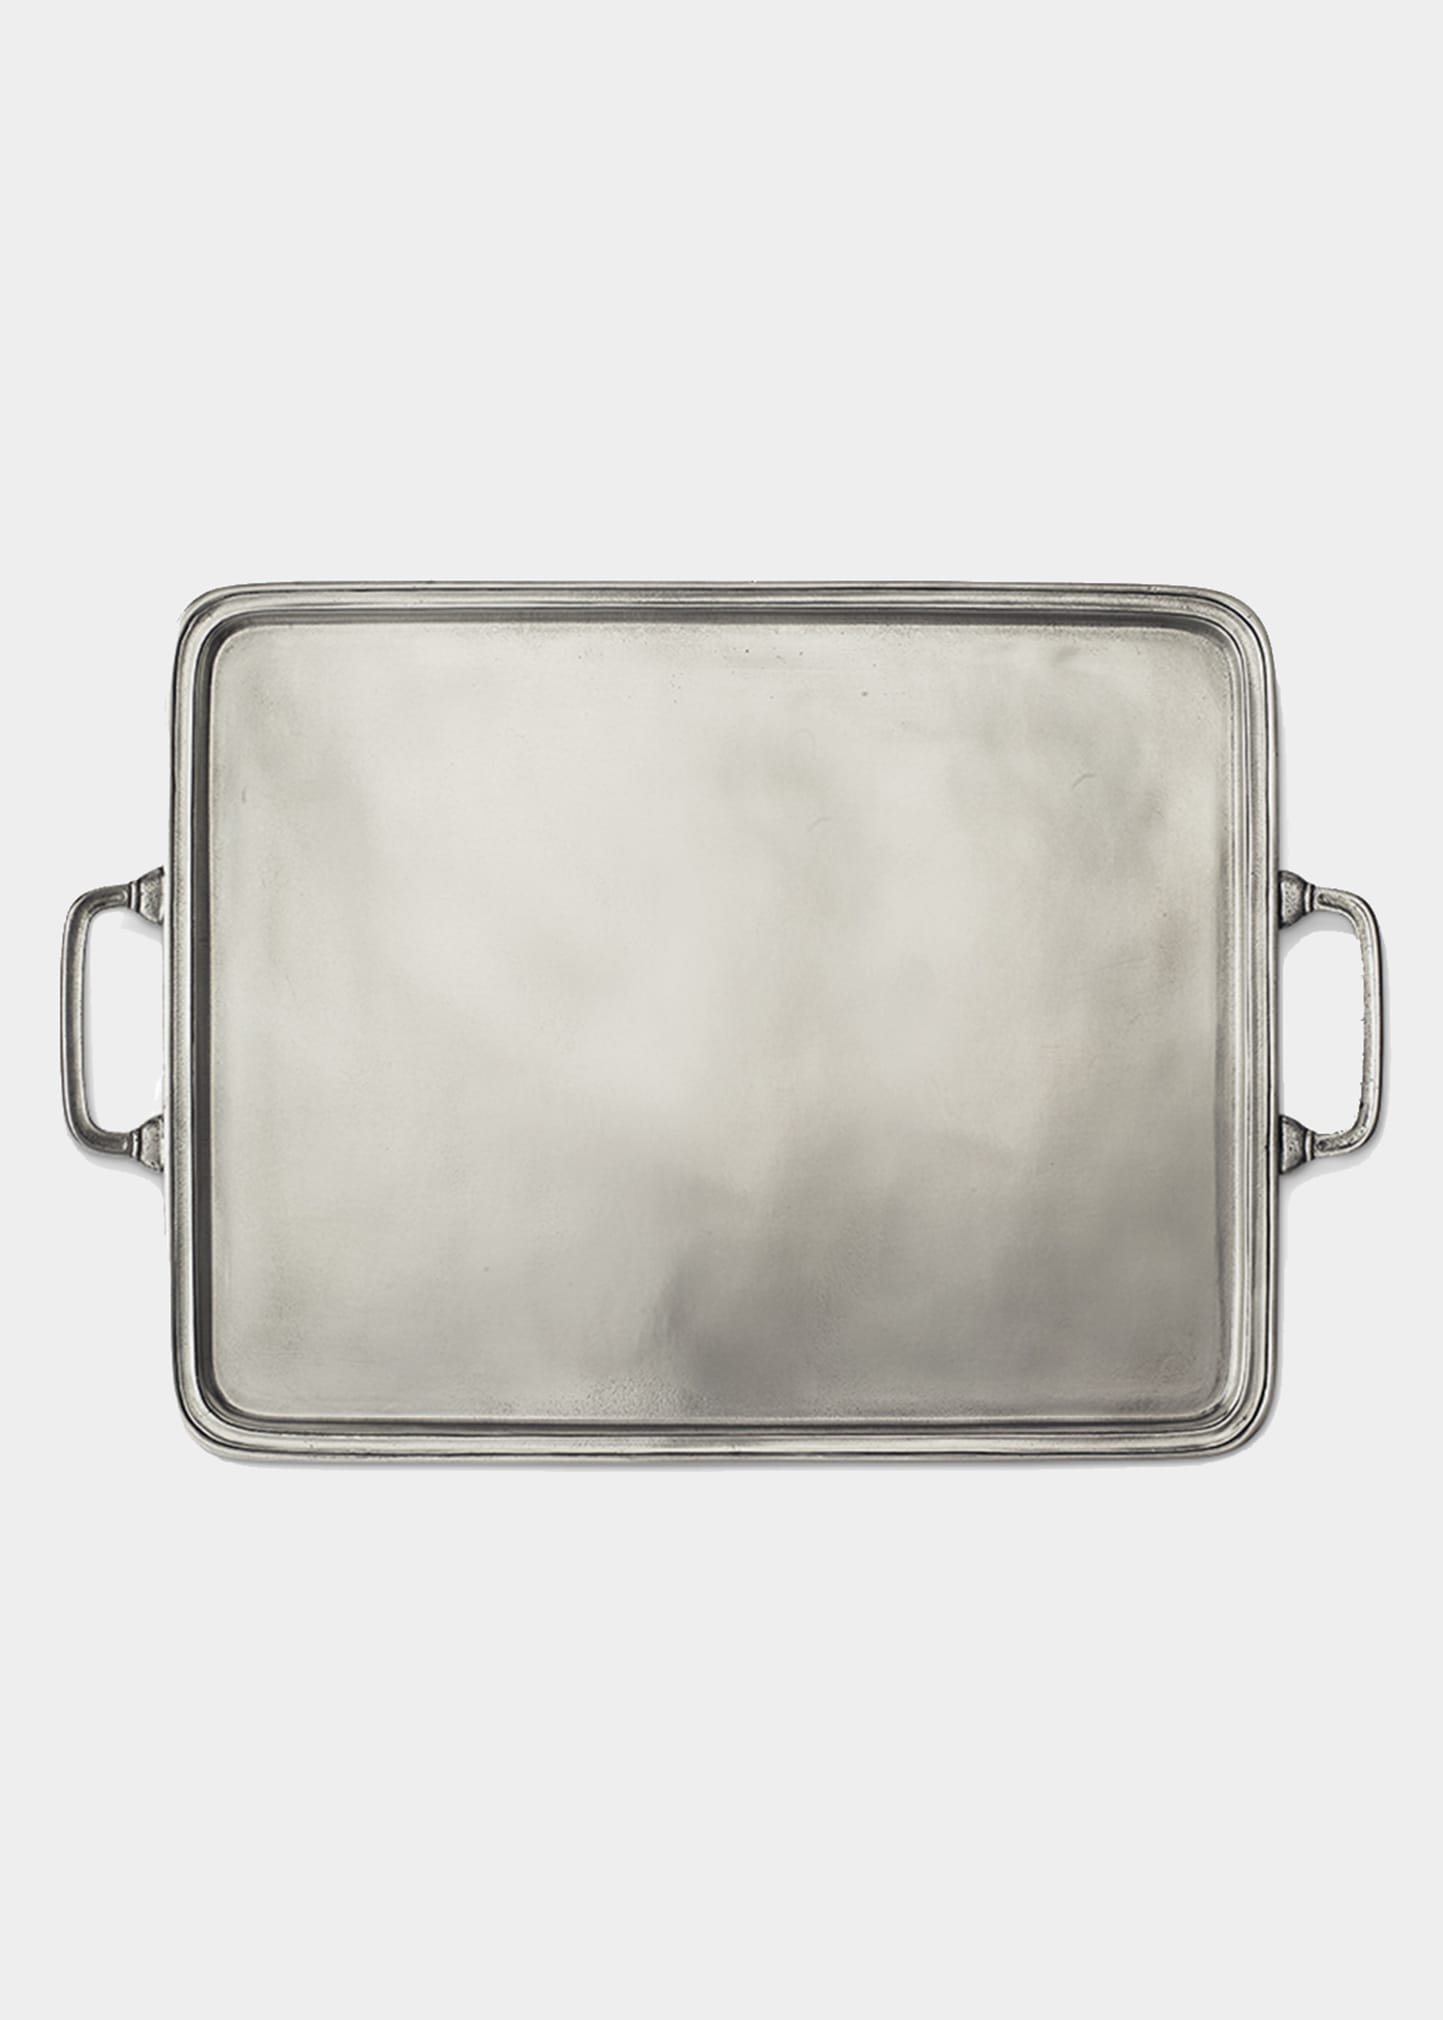 Match X-Large Rectangle Tray with Handles